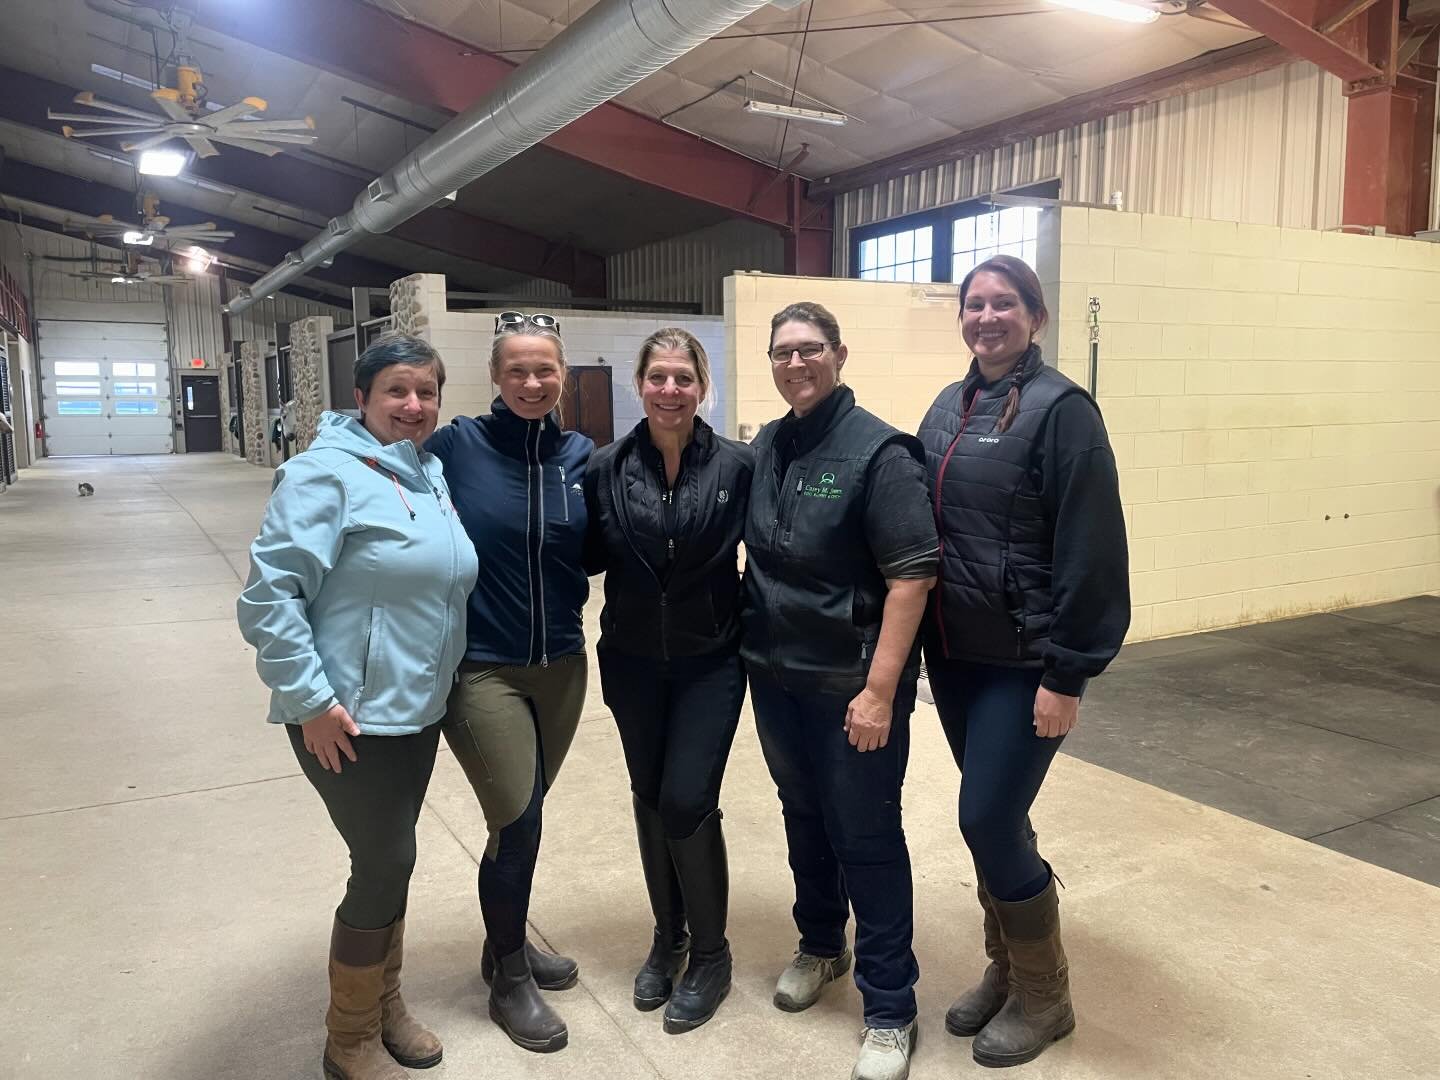 A Day in the Life of a Valkyrie Equine Bodyworker:

This past week, I was so incredibly fortunate to be able to tag along with Jean Aloi Dempsey as she hosted Jillian Kreinbring and Casey M. Jones, who worked on her horses. The knowledge I gained was